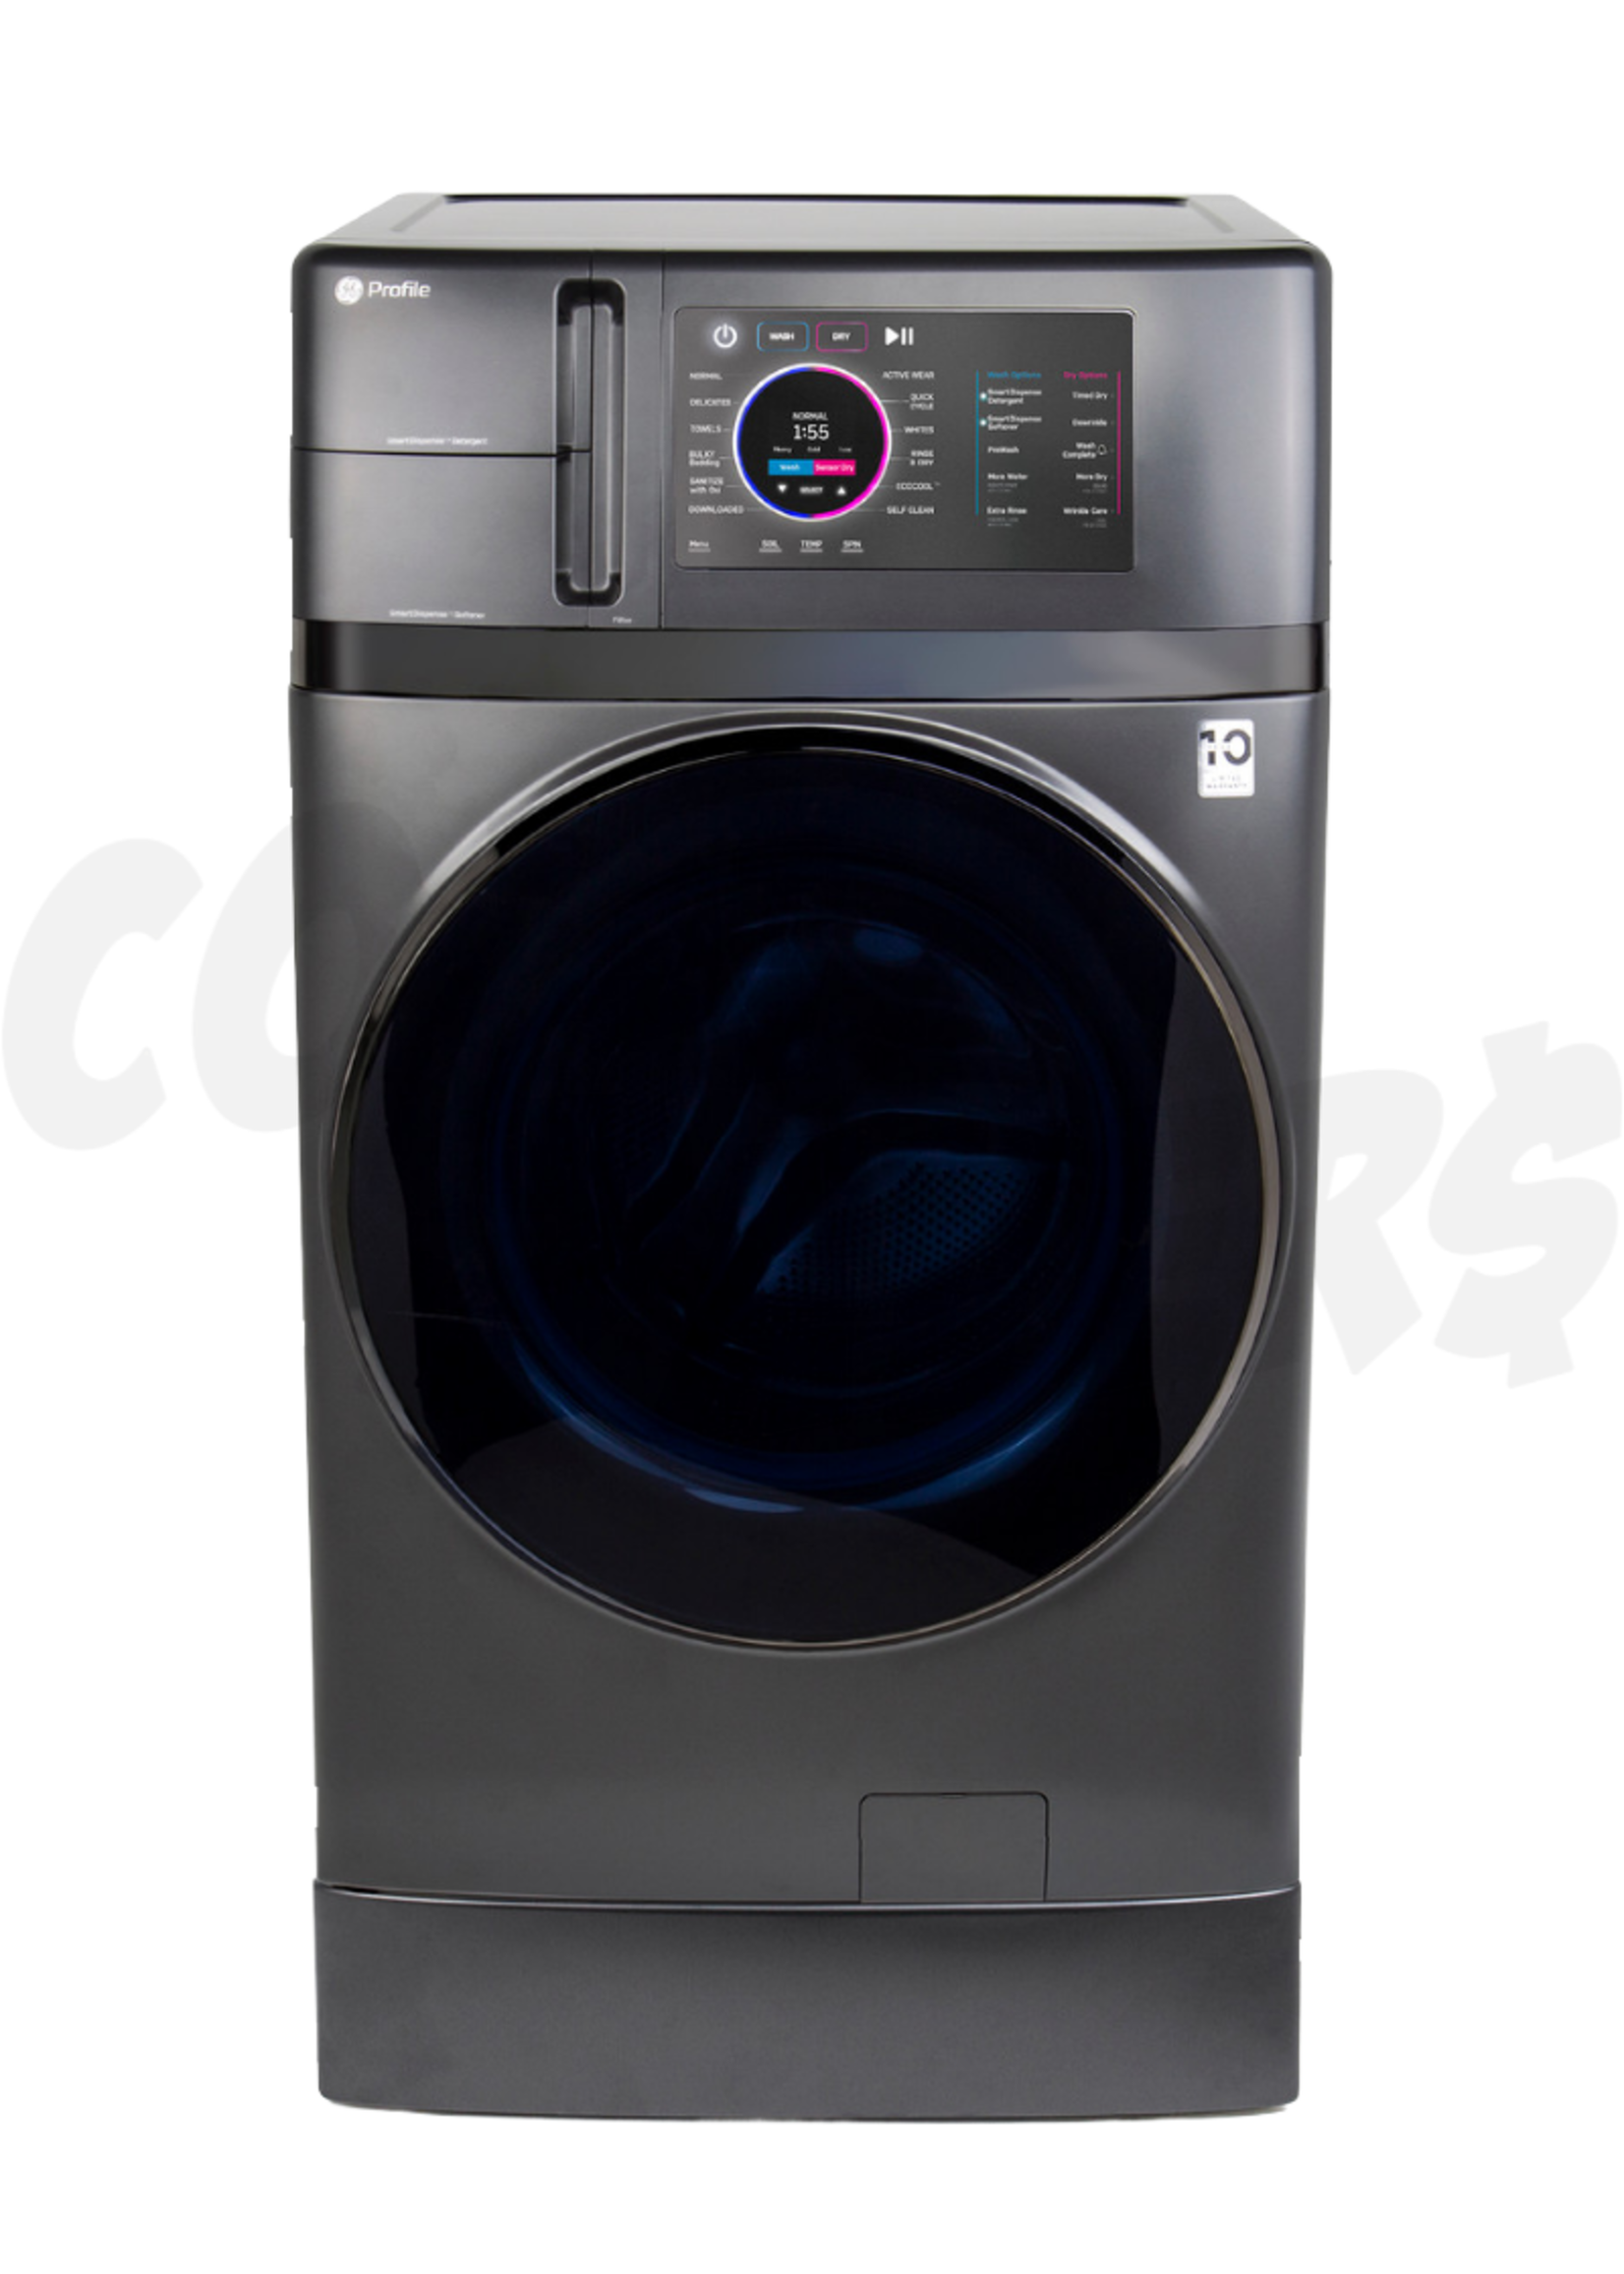 G.E G.E. Profile 4.8 cu. ft. Capacity Washer & Electric Dryer in 1